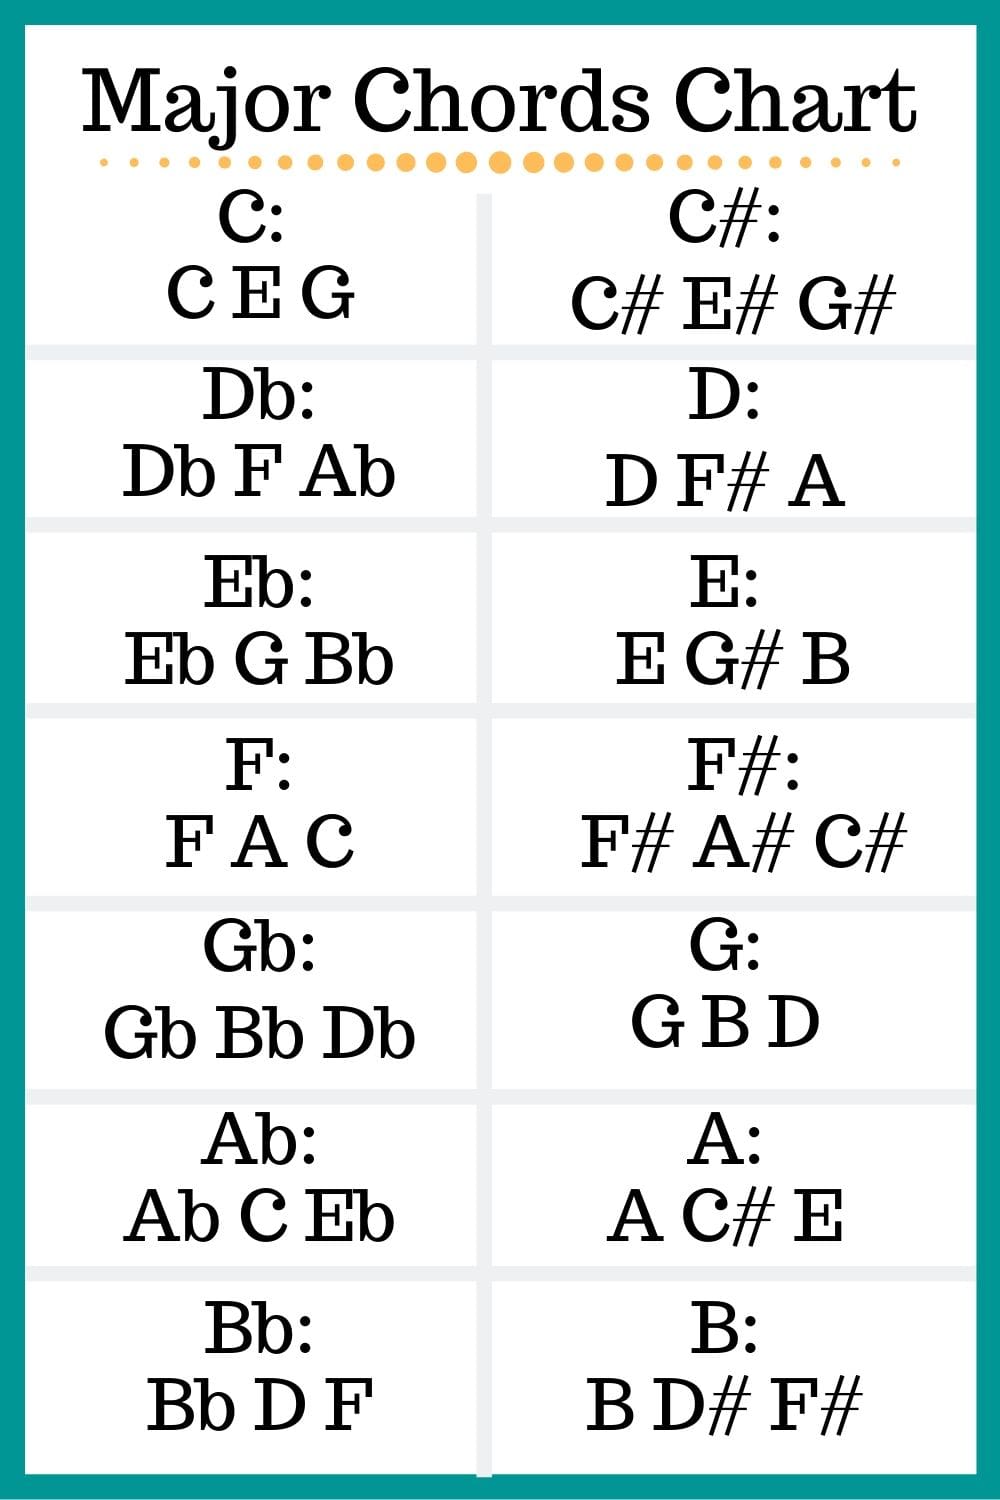 Learn and see what the 12 major chords are, the notes in each chord, chord charts and how to play them. 